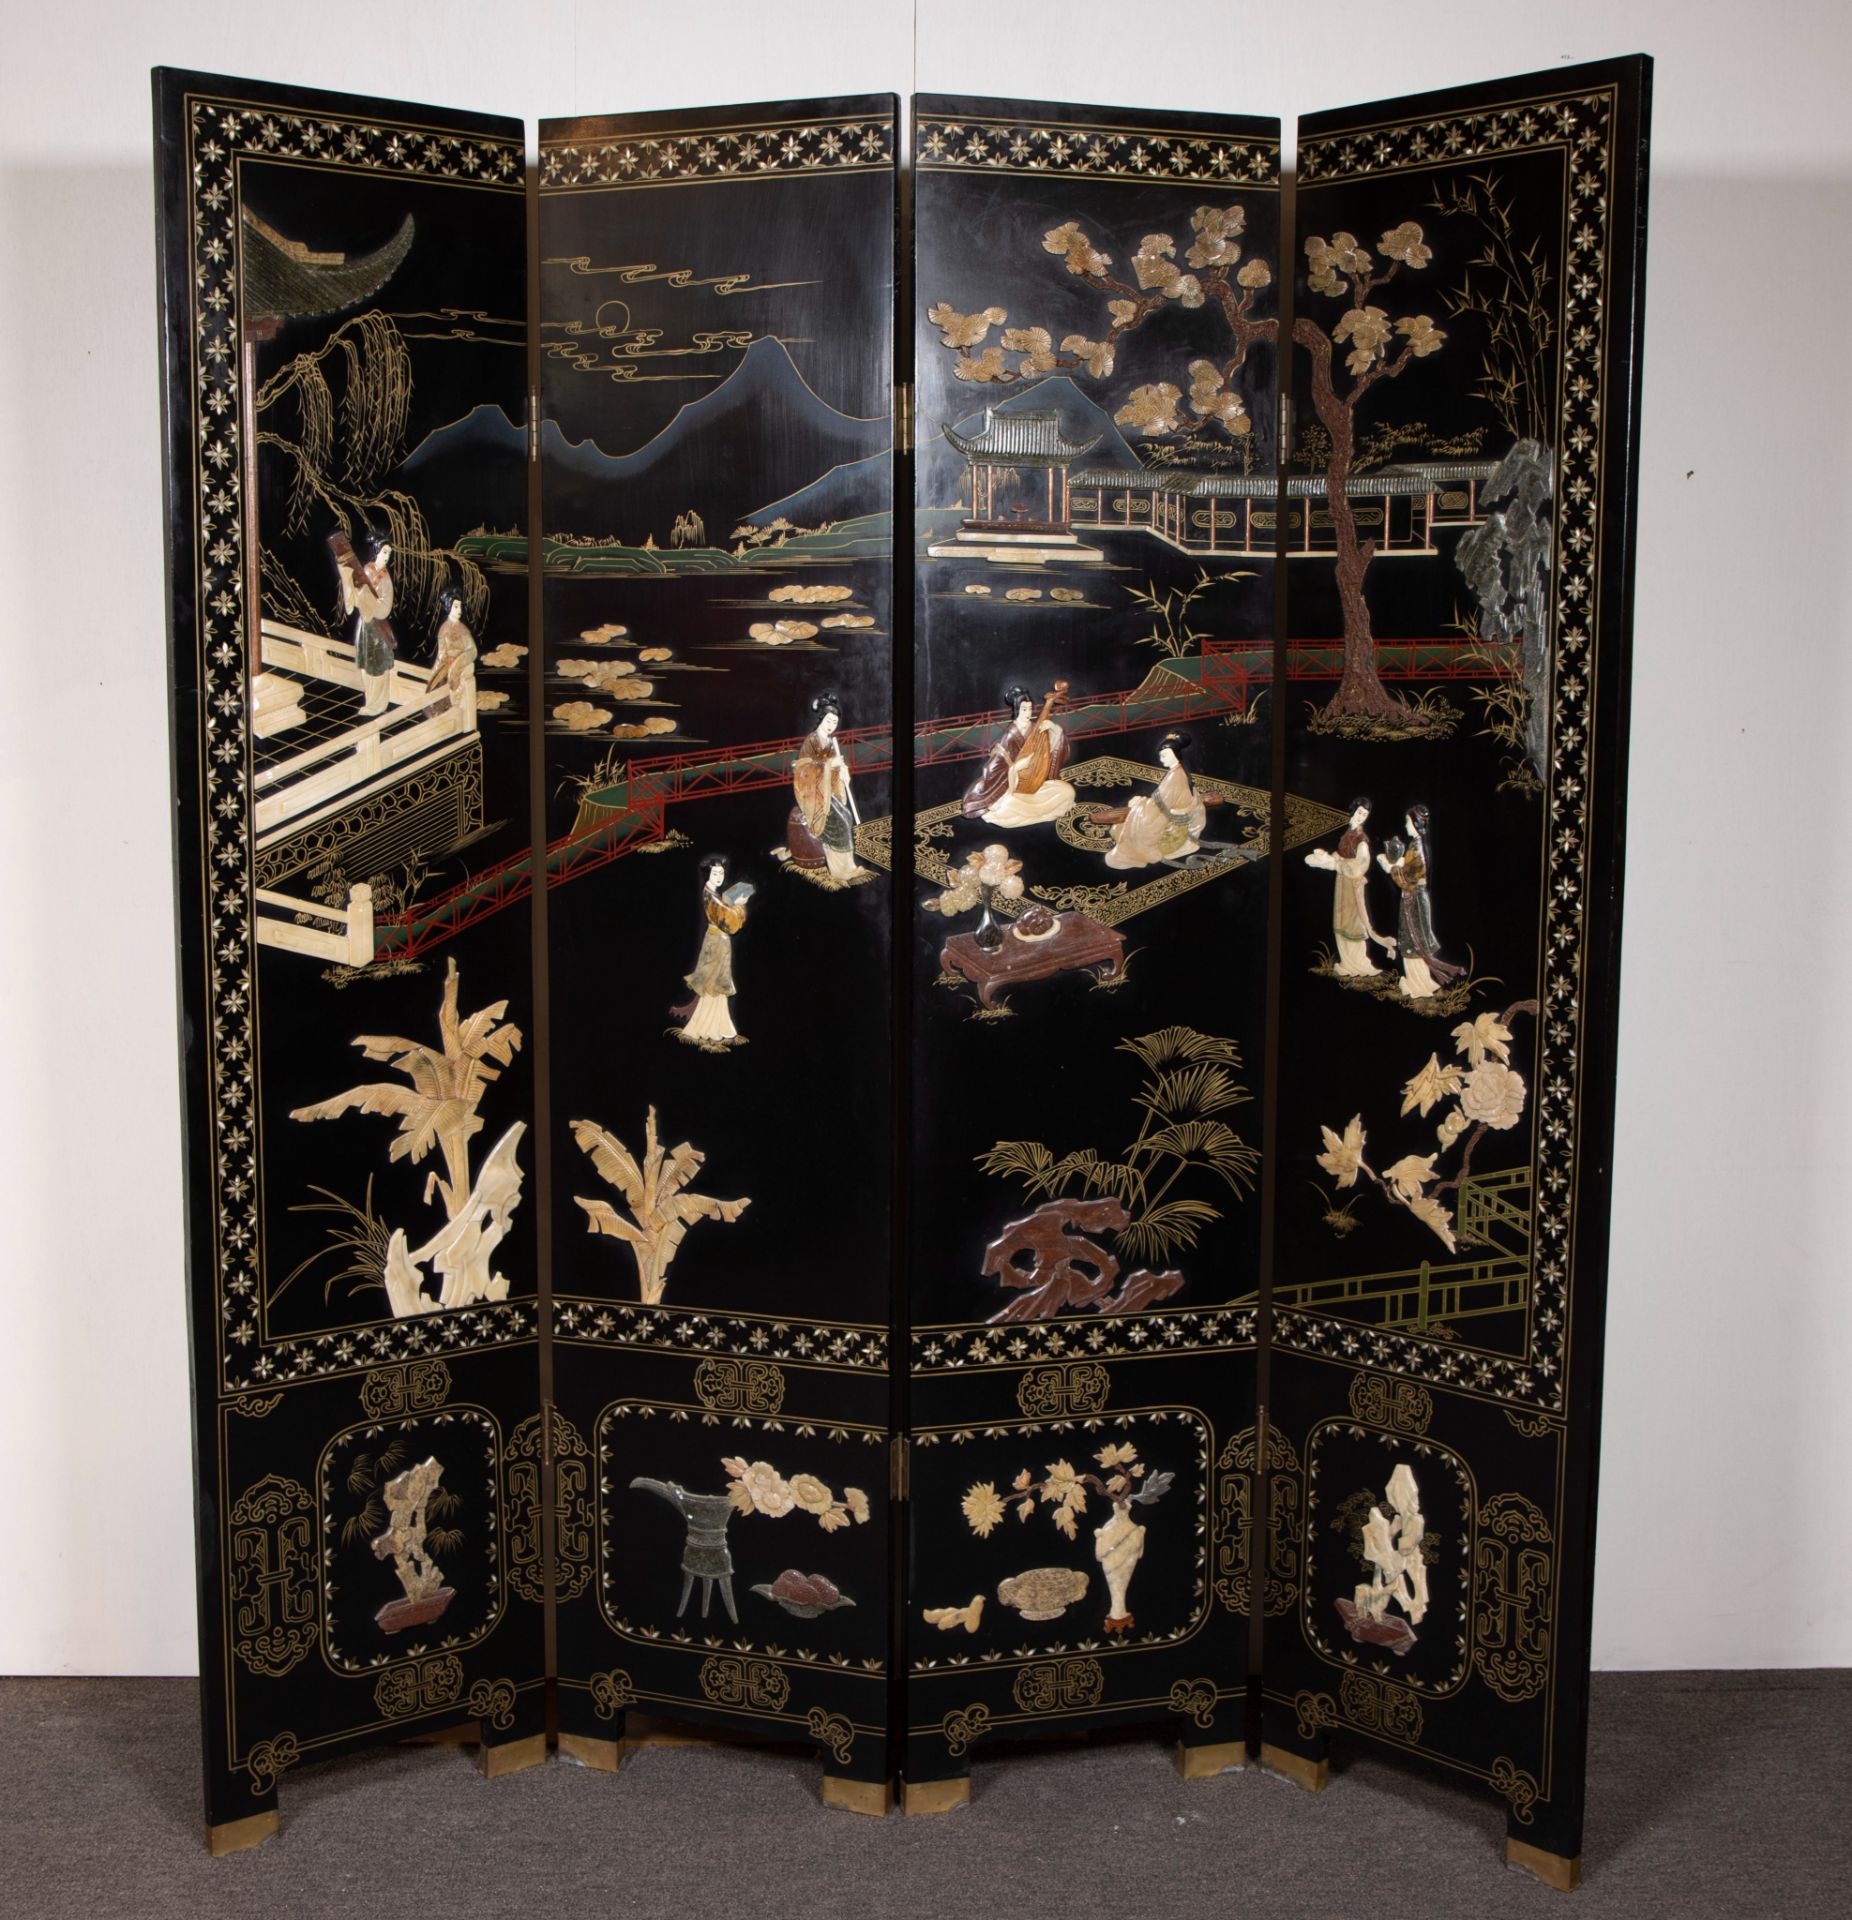 Chinese paravant, 4 shutters lacquered black, raised with figures and motifs in jade/serpentine